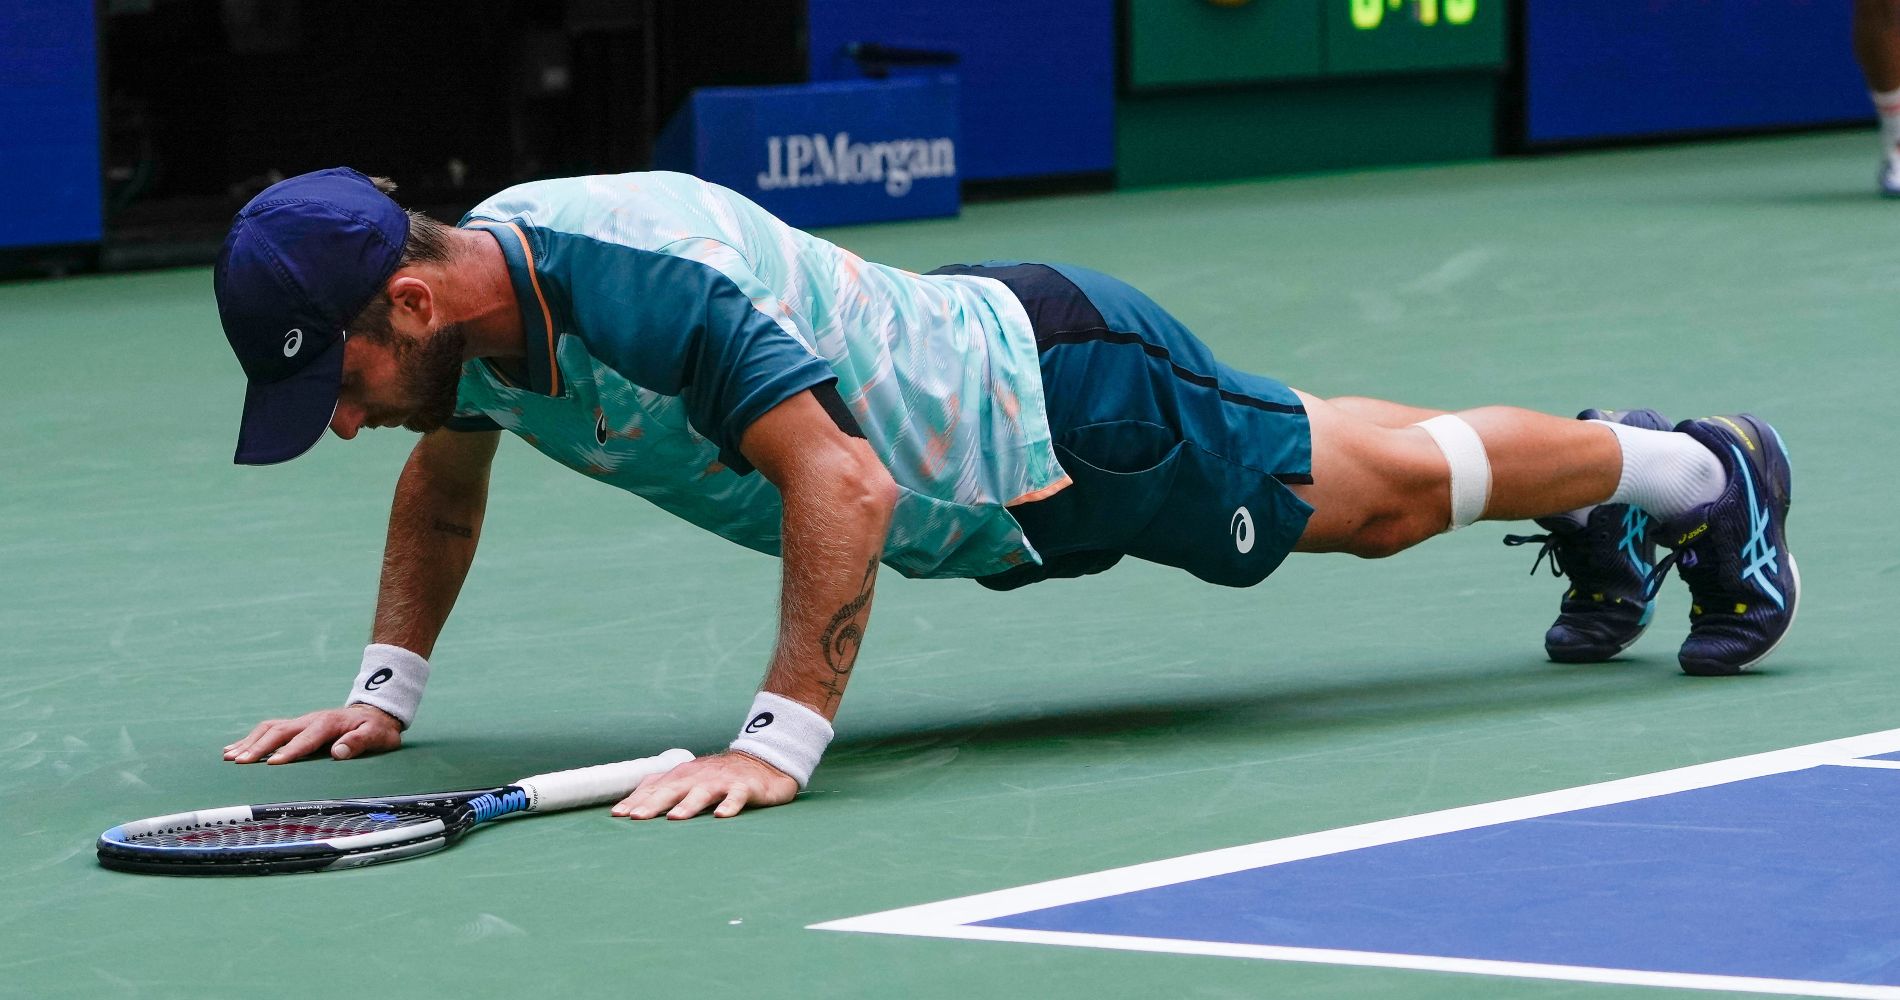 Corentin Moutet doing some physical exercice during his match at the US Open in 2022